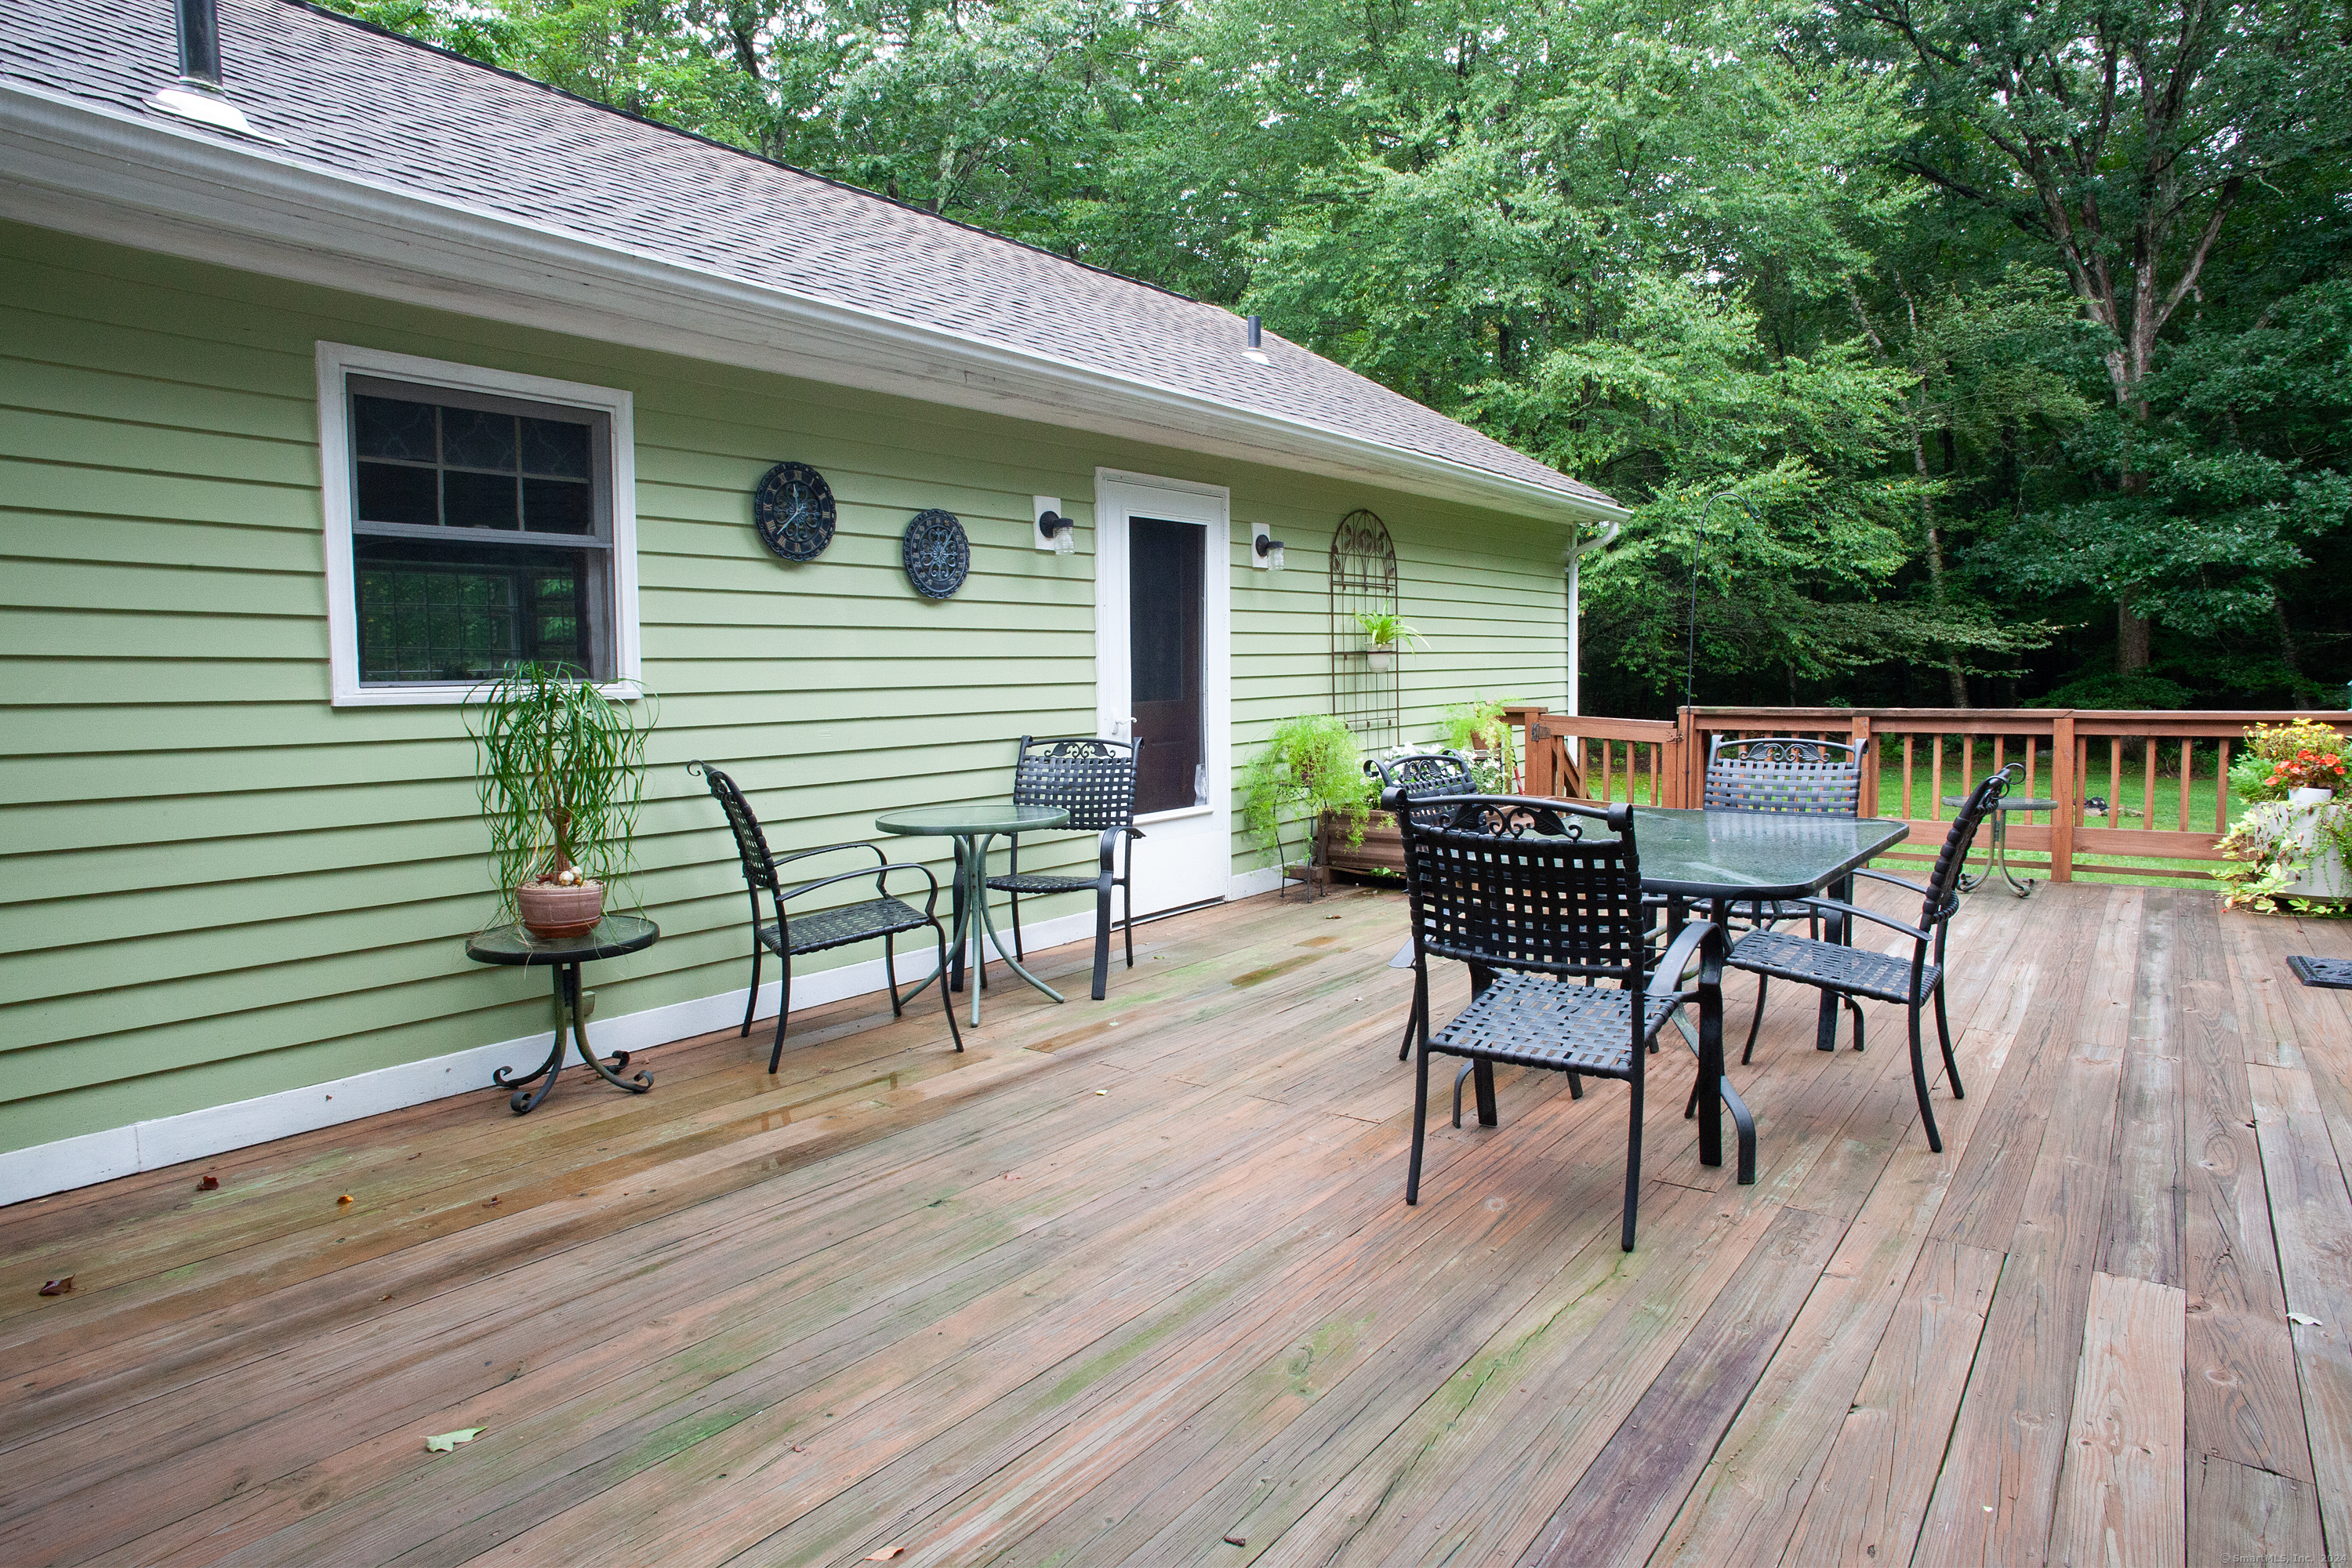 In-Law apartment and shared deck.